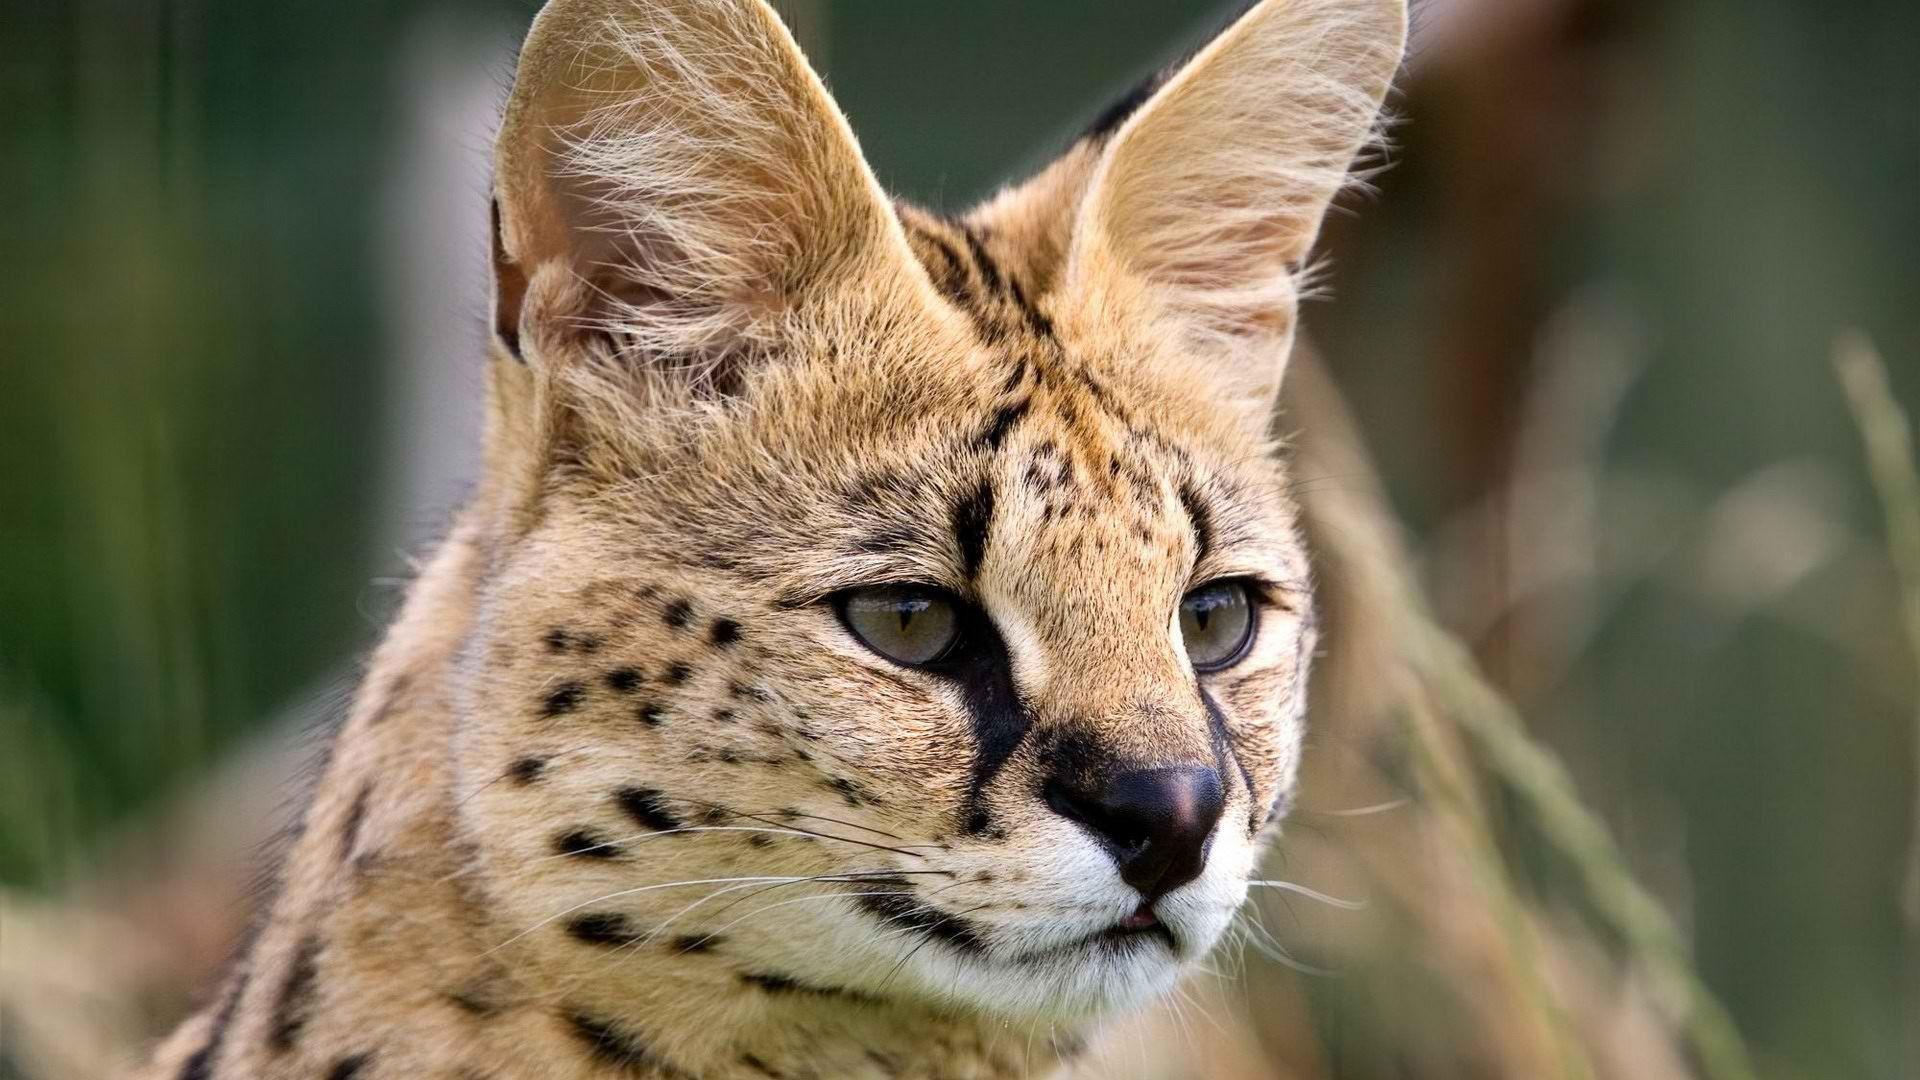 The Image of Animals Wildlife Outdoors African Serval Wildcat